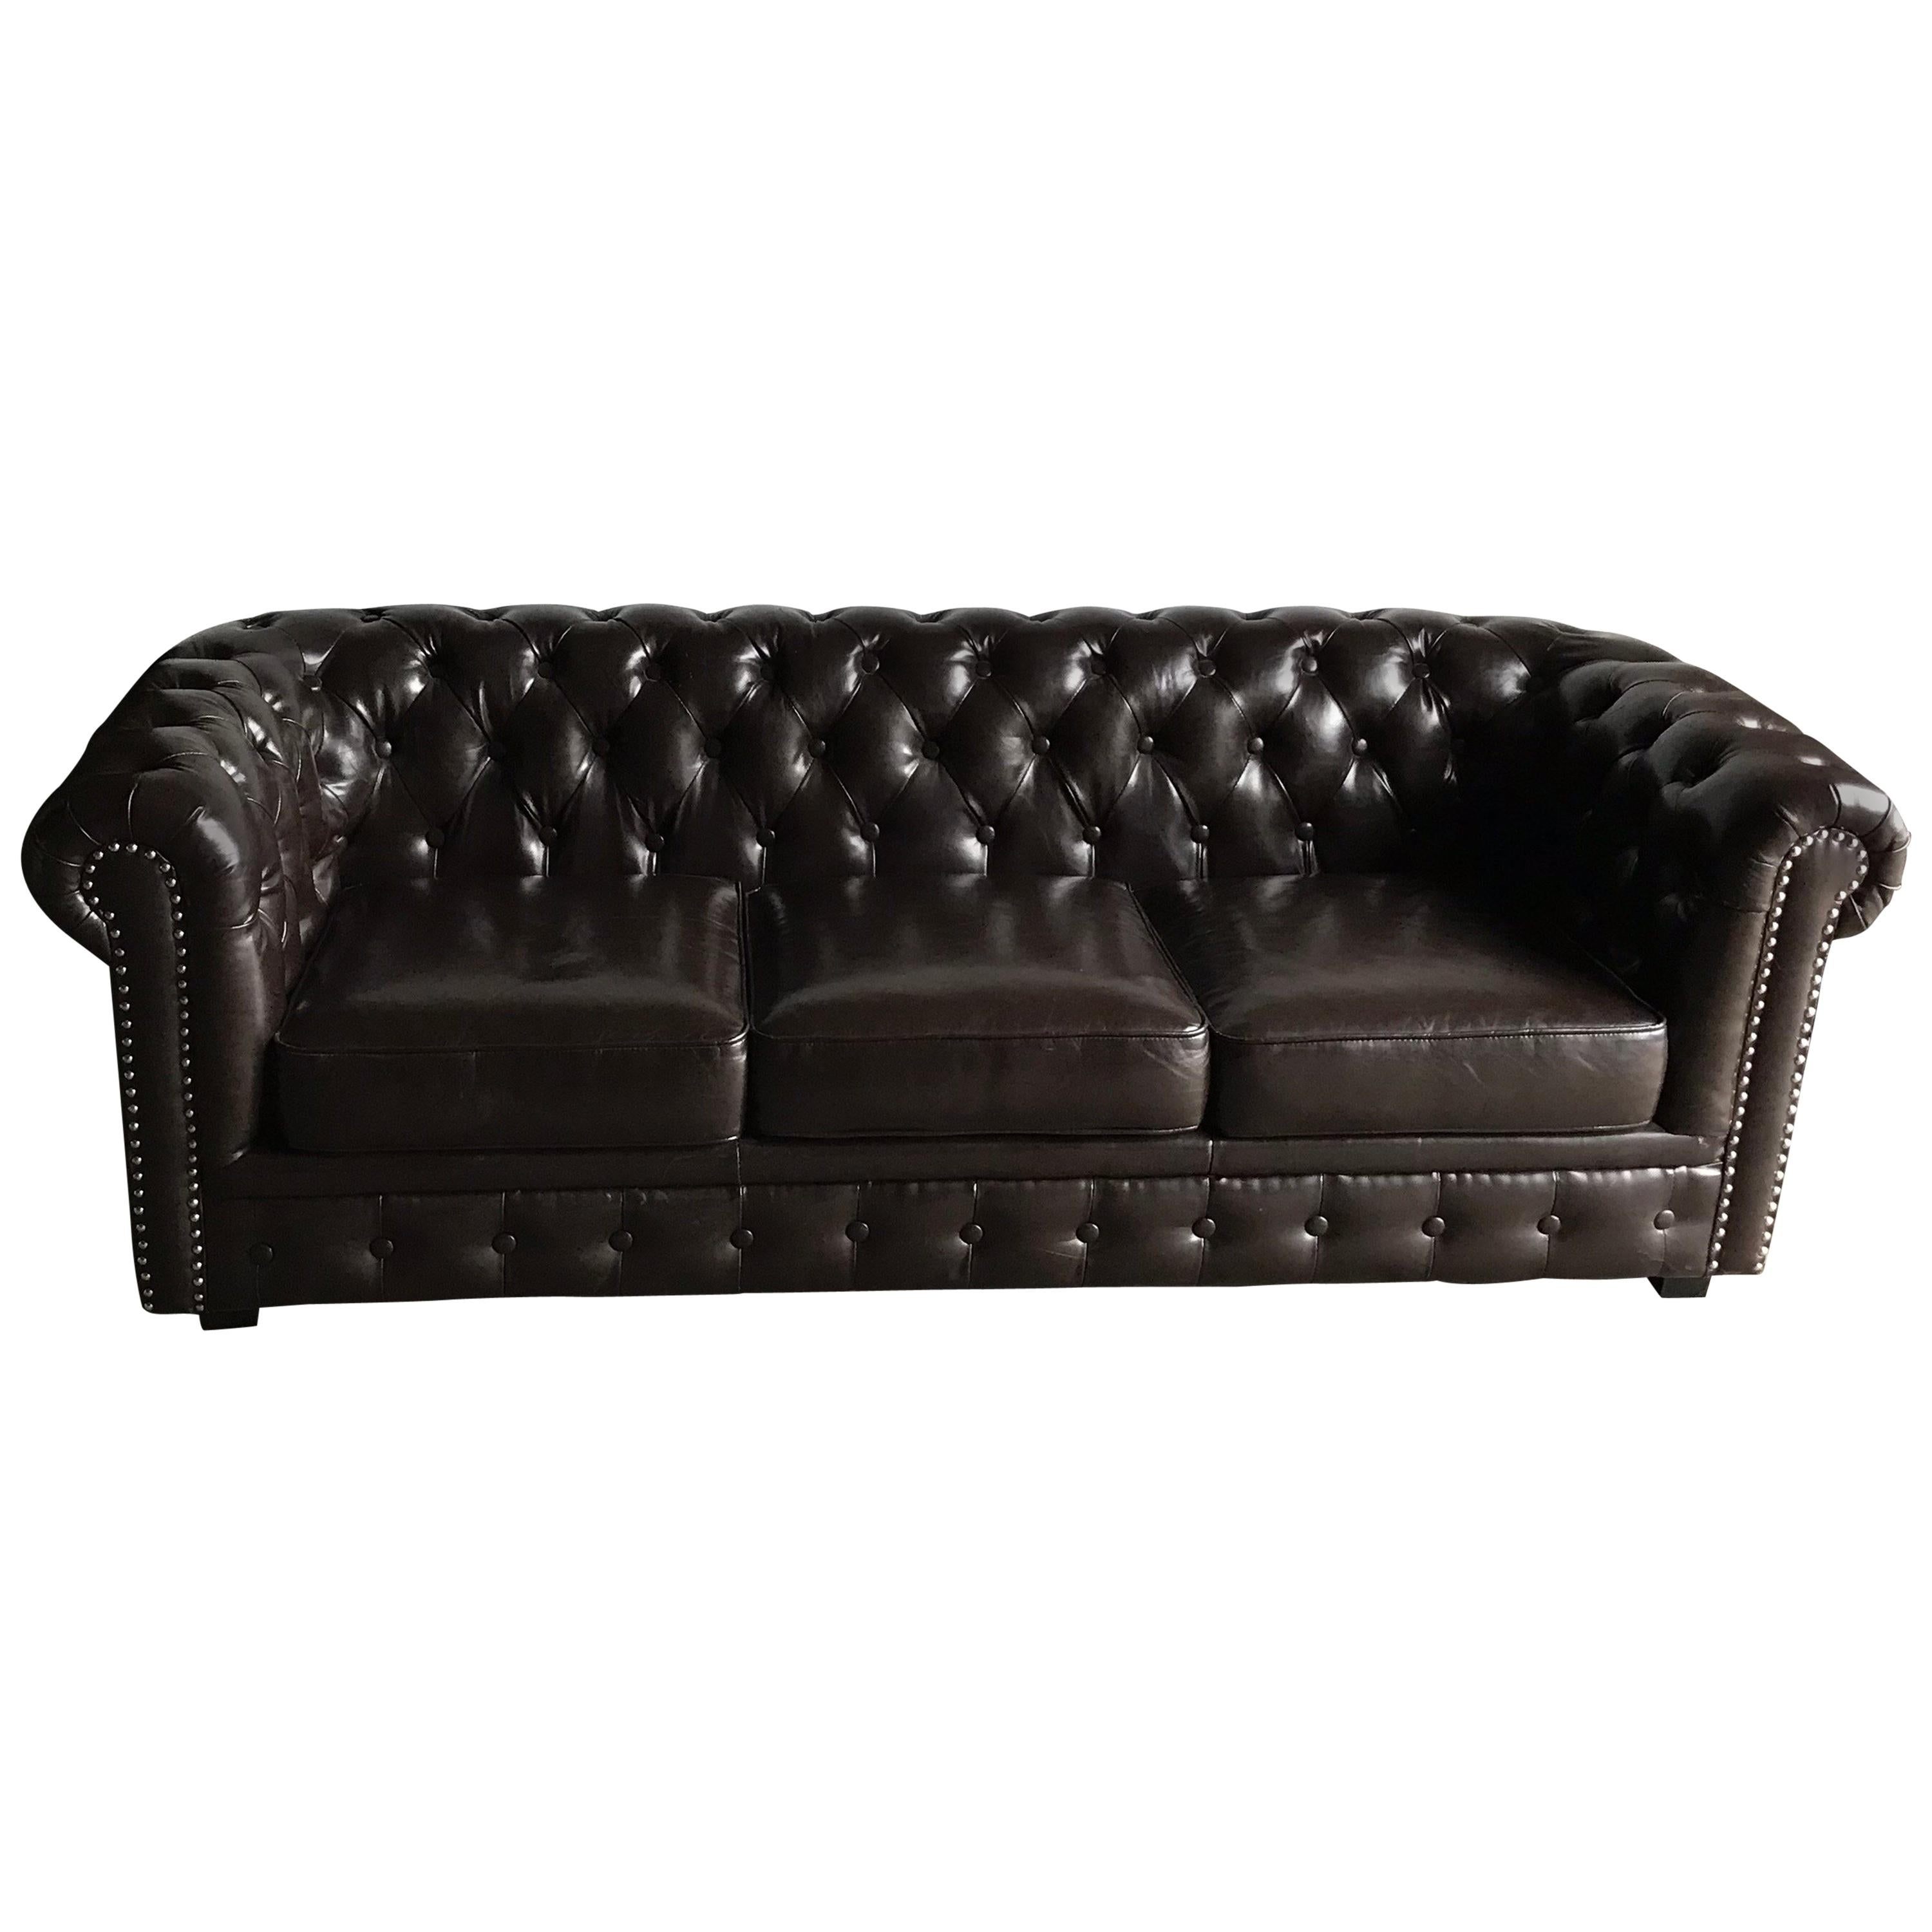 Midcentury English Brown Chesterfield Sofa For Sale